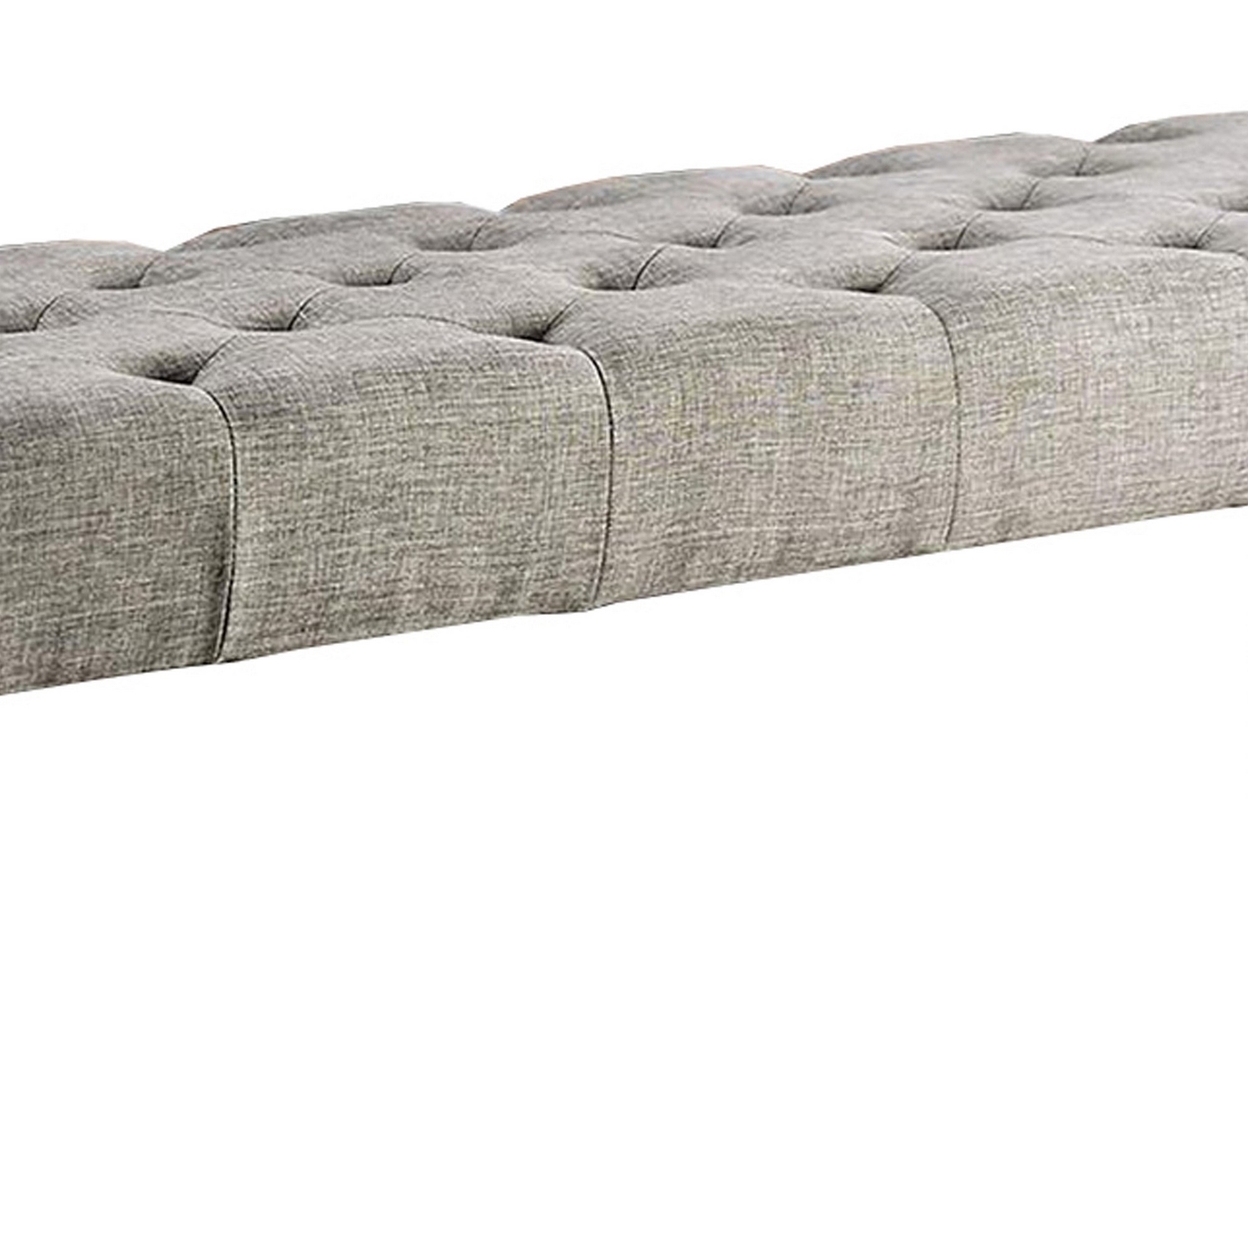 48 Inches Bench With Tufted Seat And Chamfered Legs, Light Gray- Saltoro Sherpi